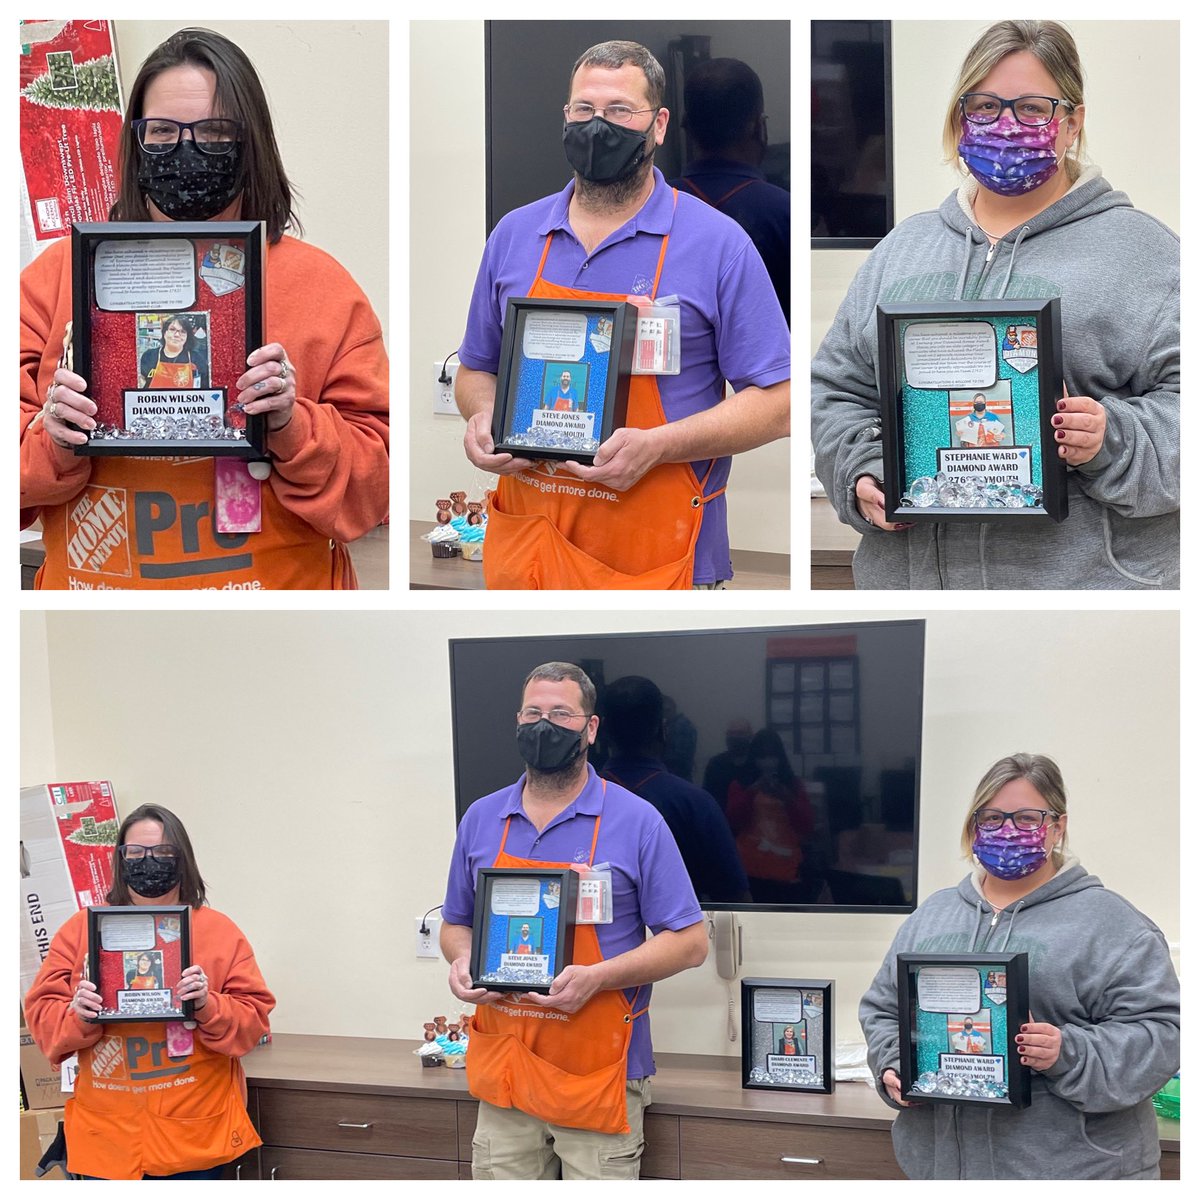 Shouting out these awesome Diamond Award winners from 2762! Congrats to PA Robin and D21 associate Steve! We also surprised CXM Stephanie with her Diamond Award shadowbox! #DiamondClub💎 @plymouthhd2762 @AdamSee107792 @brandi_vorhoff @Erica_Hall18 @JulieGiattino @rgails